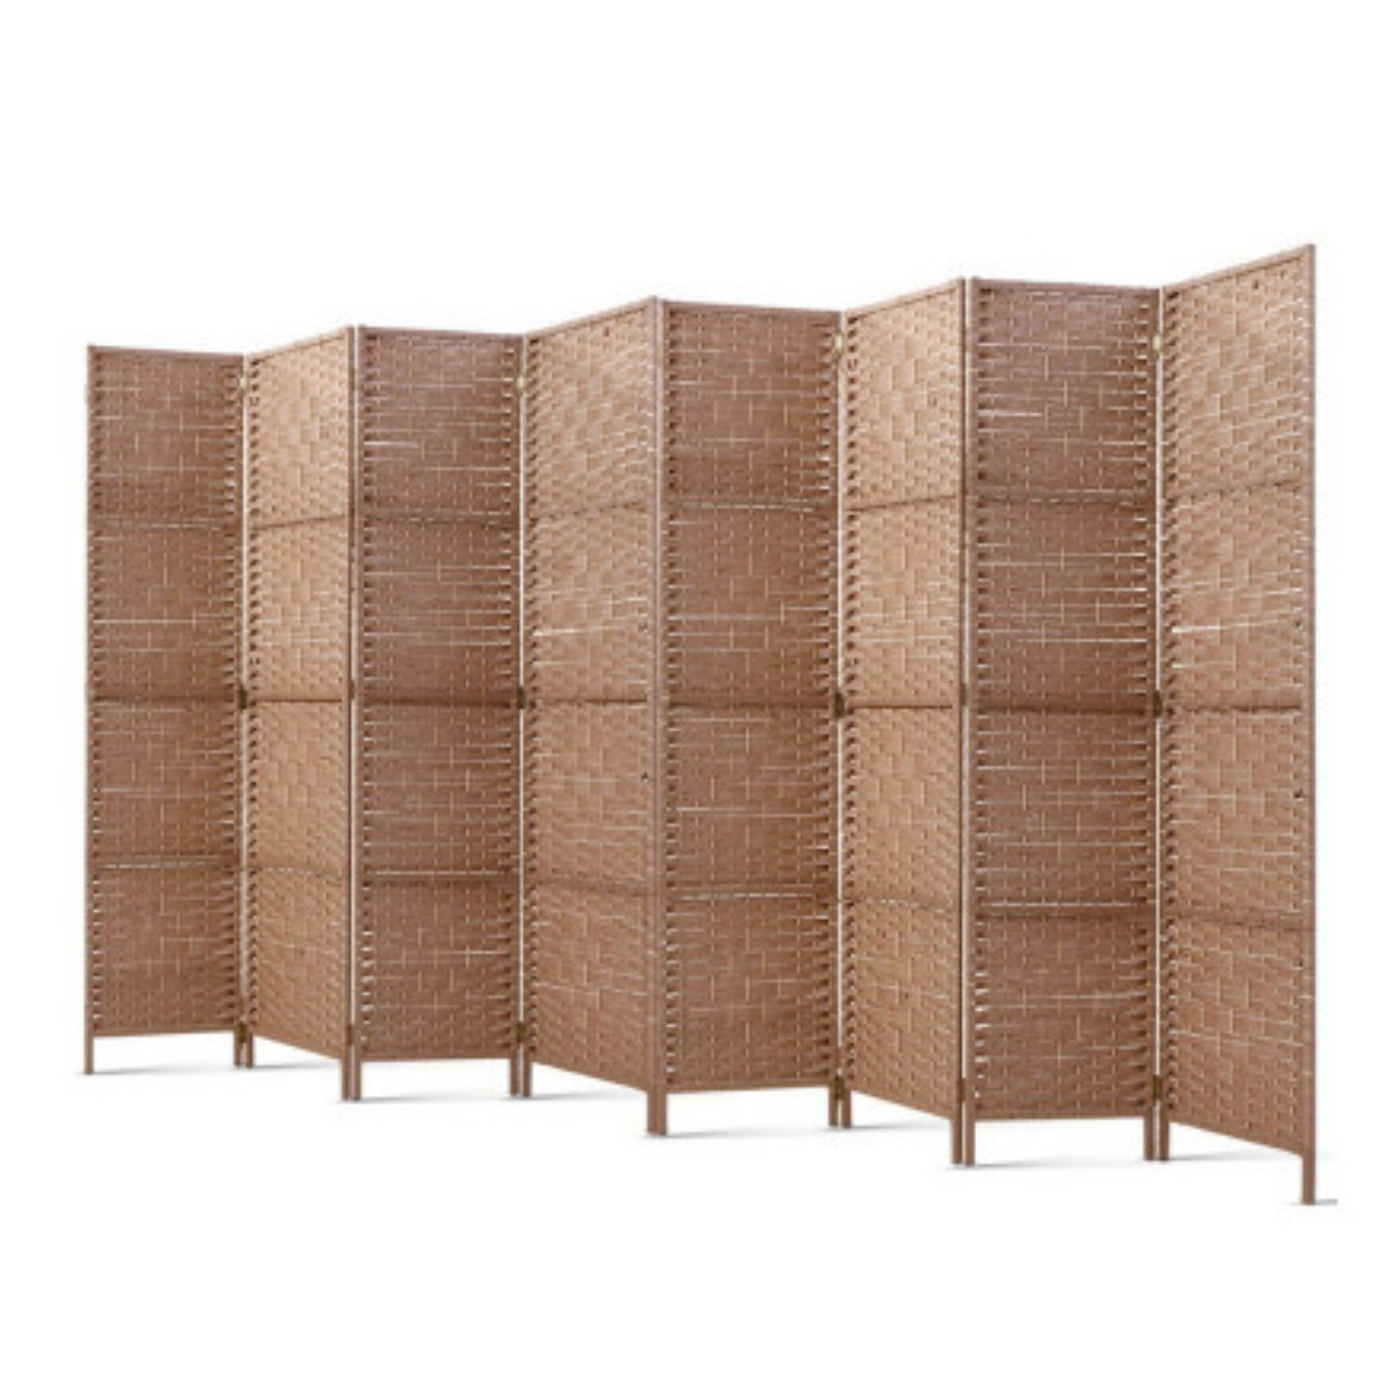 Eight Panel Natural Finish Rattan Wooden Room Divider